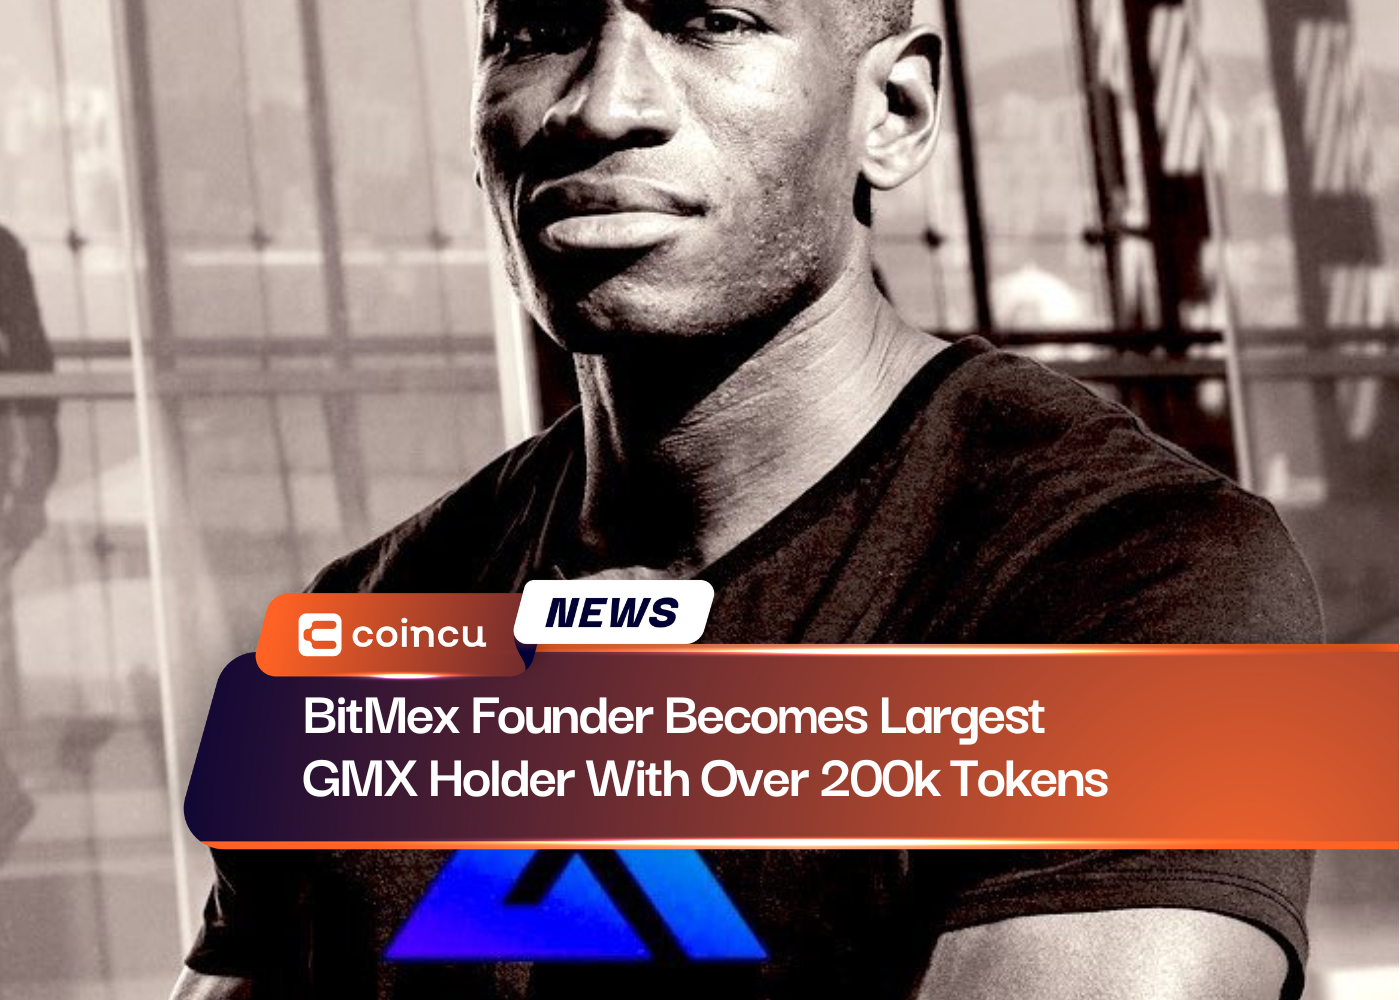 BitMex Founder Becomes Largest GMX Holder With Over 200k Tokens